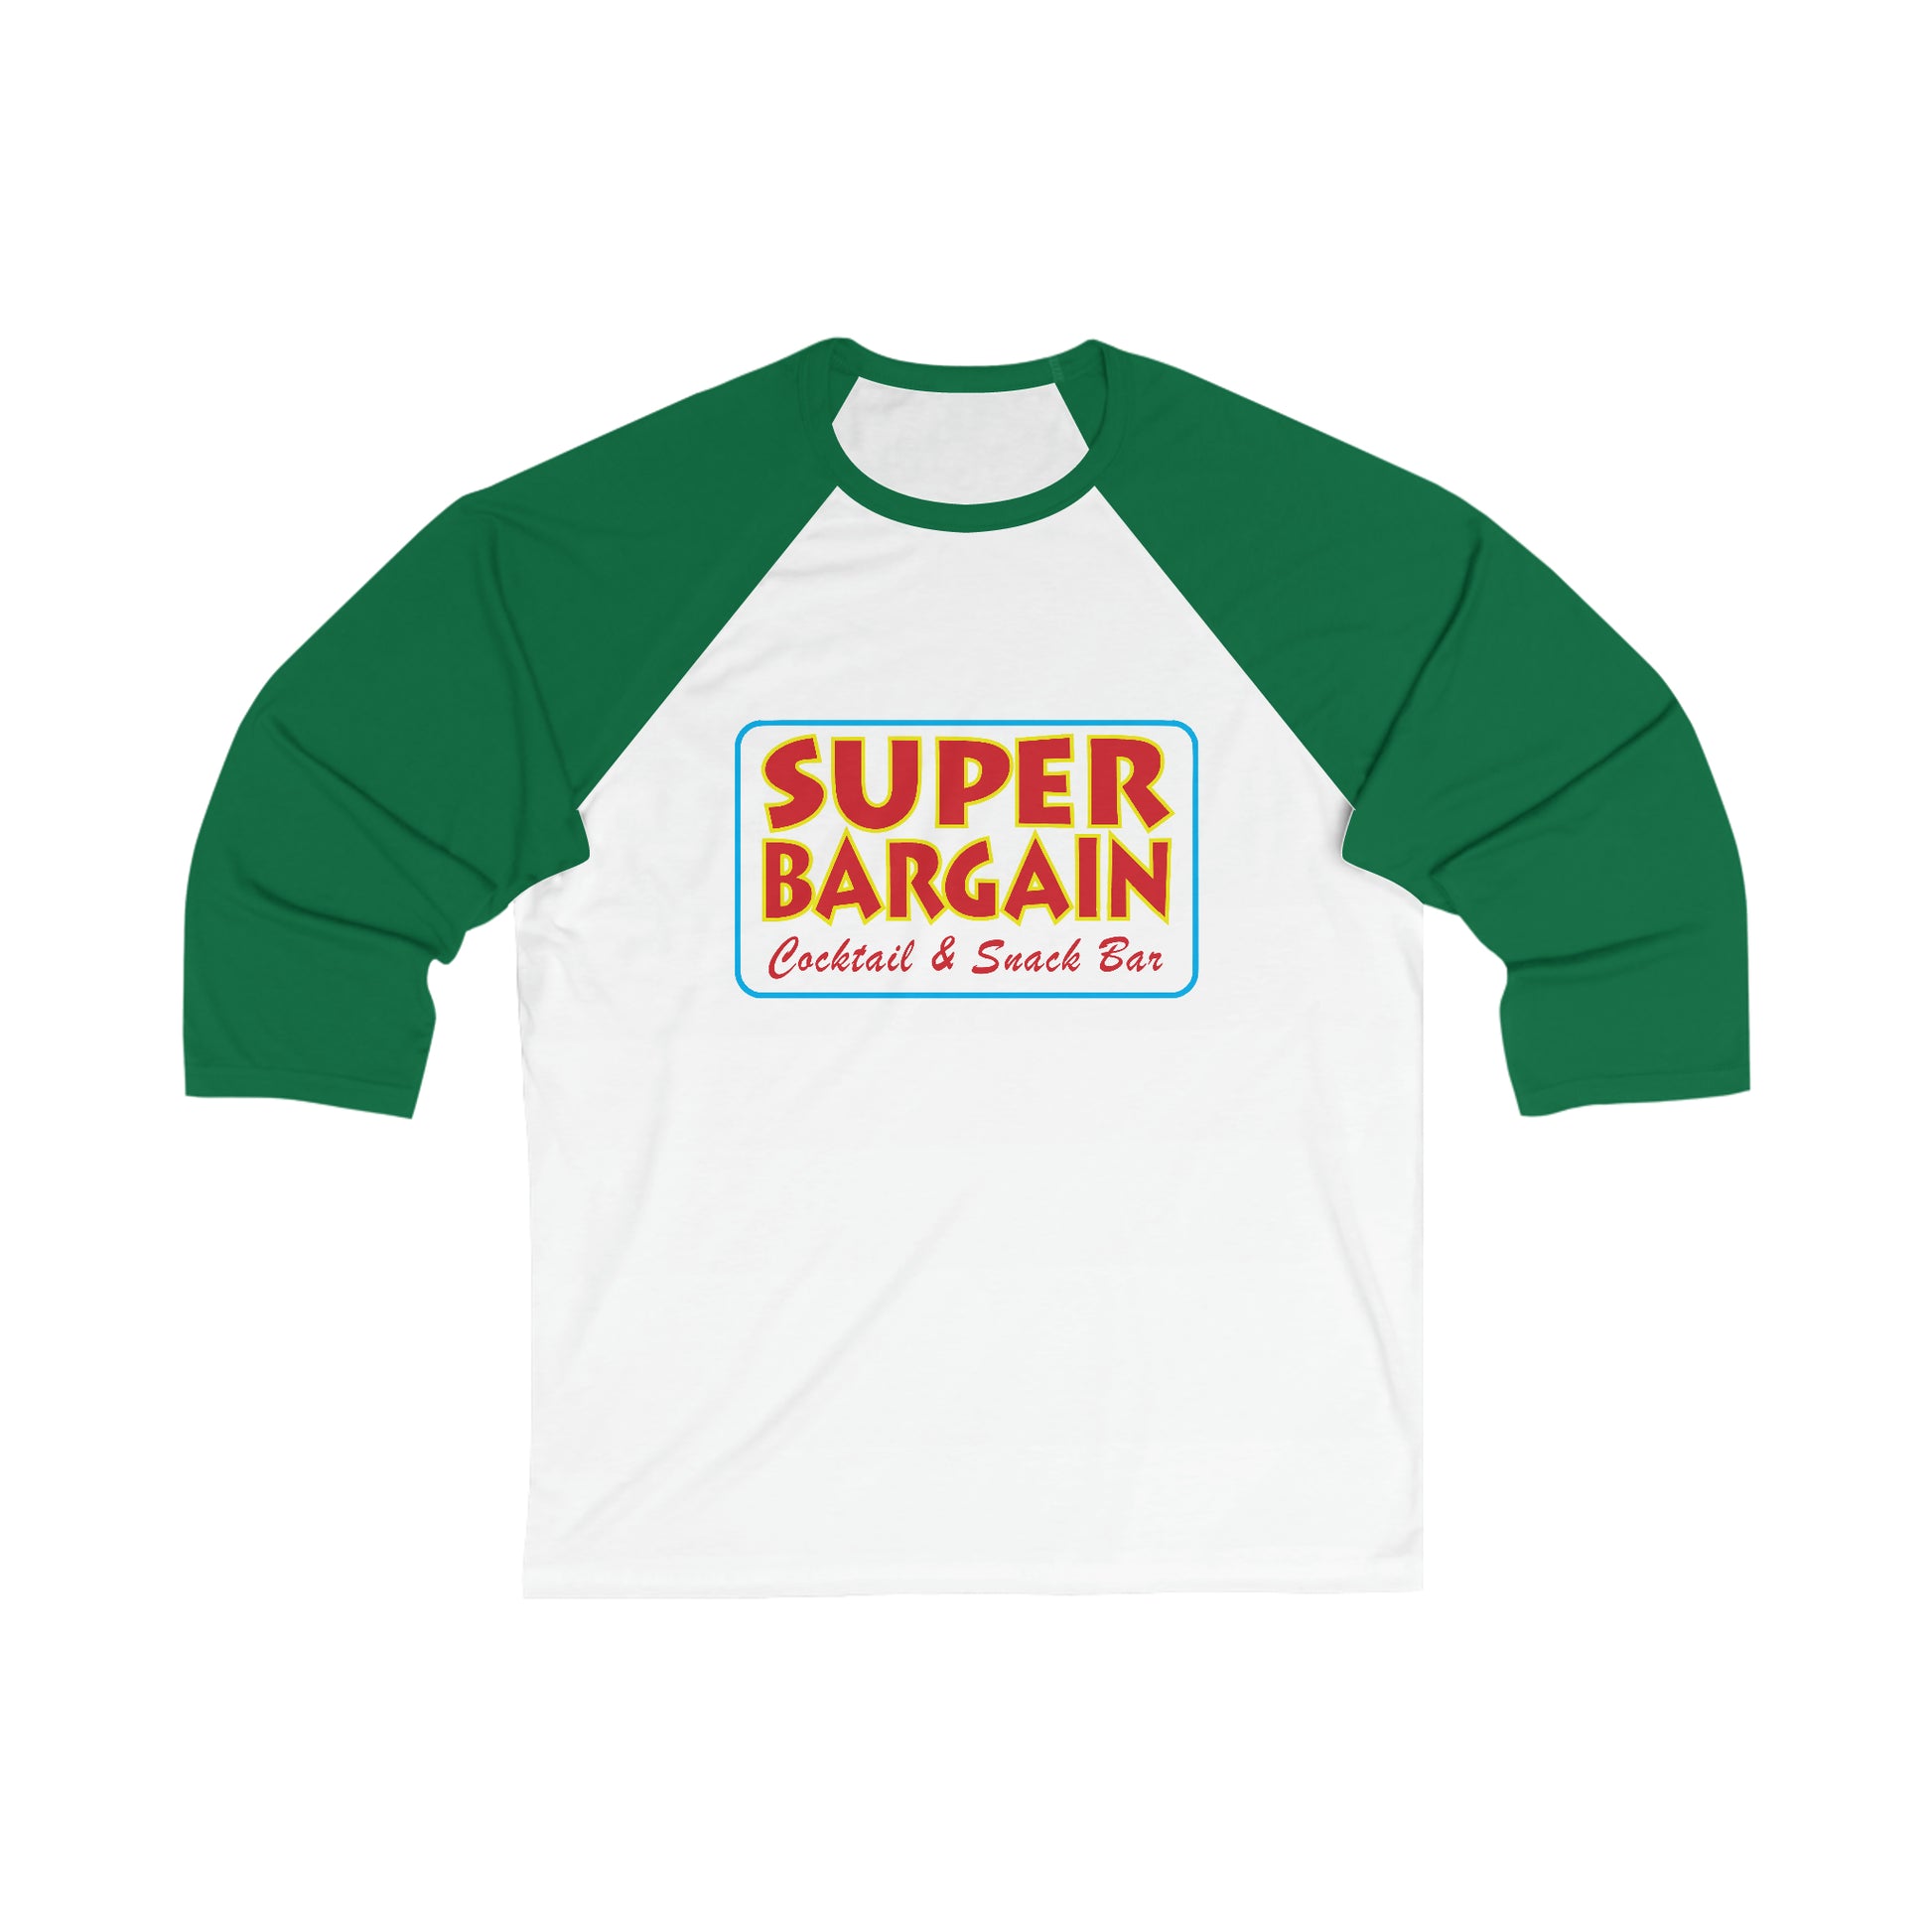 A Unisex 3/4 Sleeve Logo Baseball Tee with green sleeves and a white torso featuring a multicolored "SUPER BARGAIN Cocktail & Snack Bar - Cabbagetown" logo in retro style on the front. (Printify)